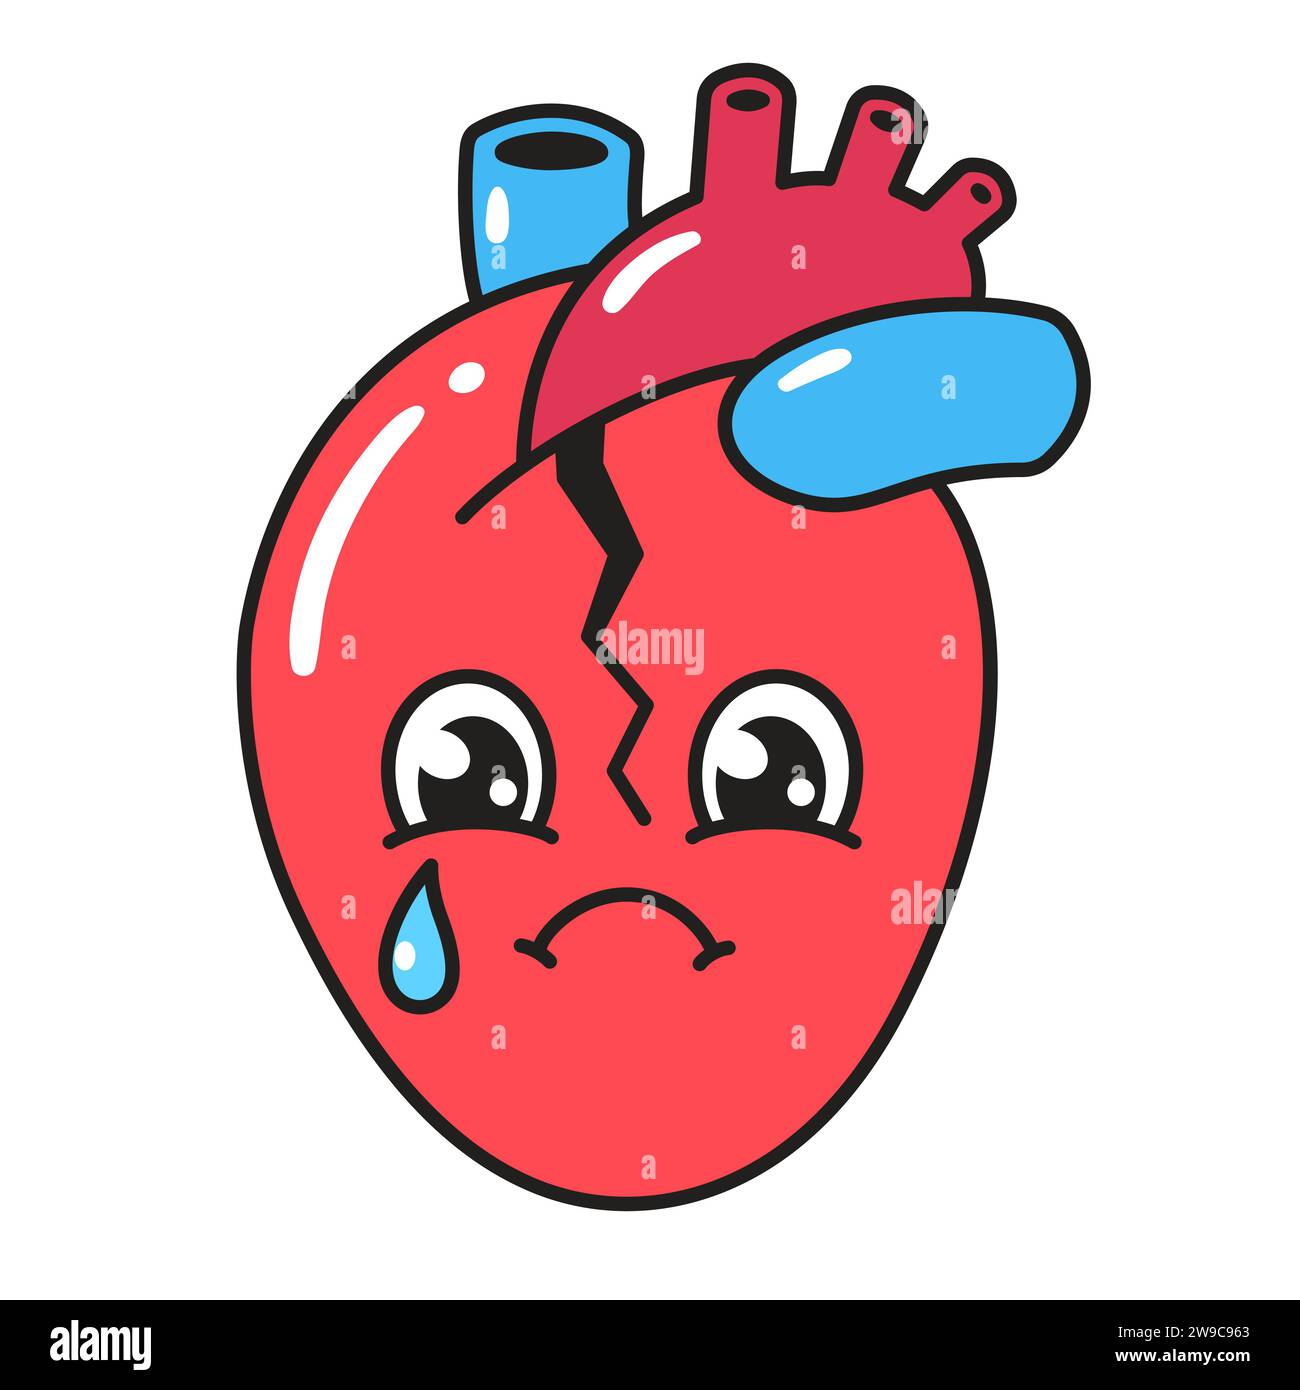 Sad broken heart character, simple retro comic style vector illustration. Cartoon anatomical heart with crying face. Stock Vector